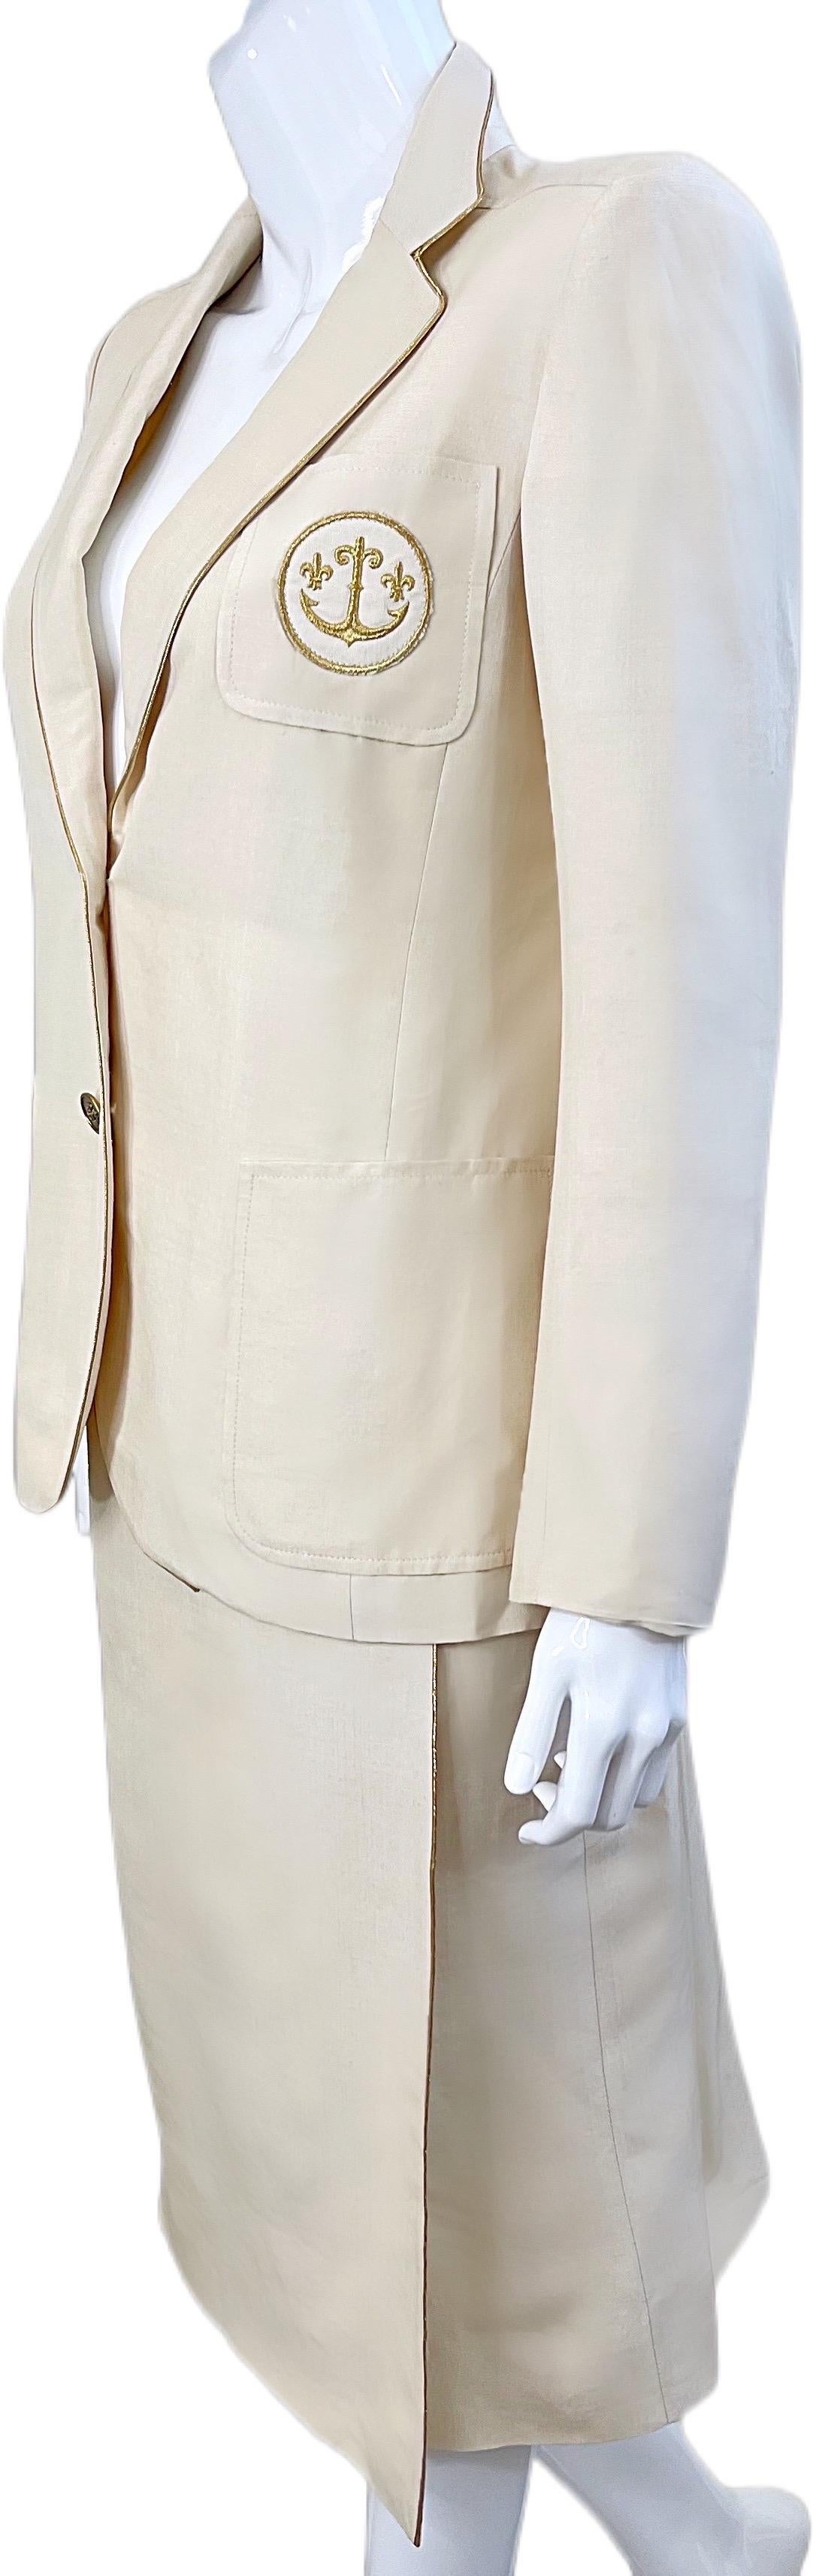 Ted Lapidus Haute Couture 1970s Nautical Ivory Anchor Vintage Silk Skirt Suit For Sale 8